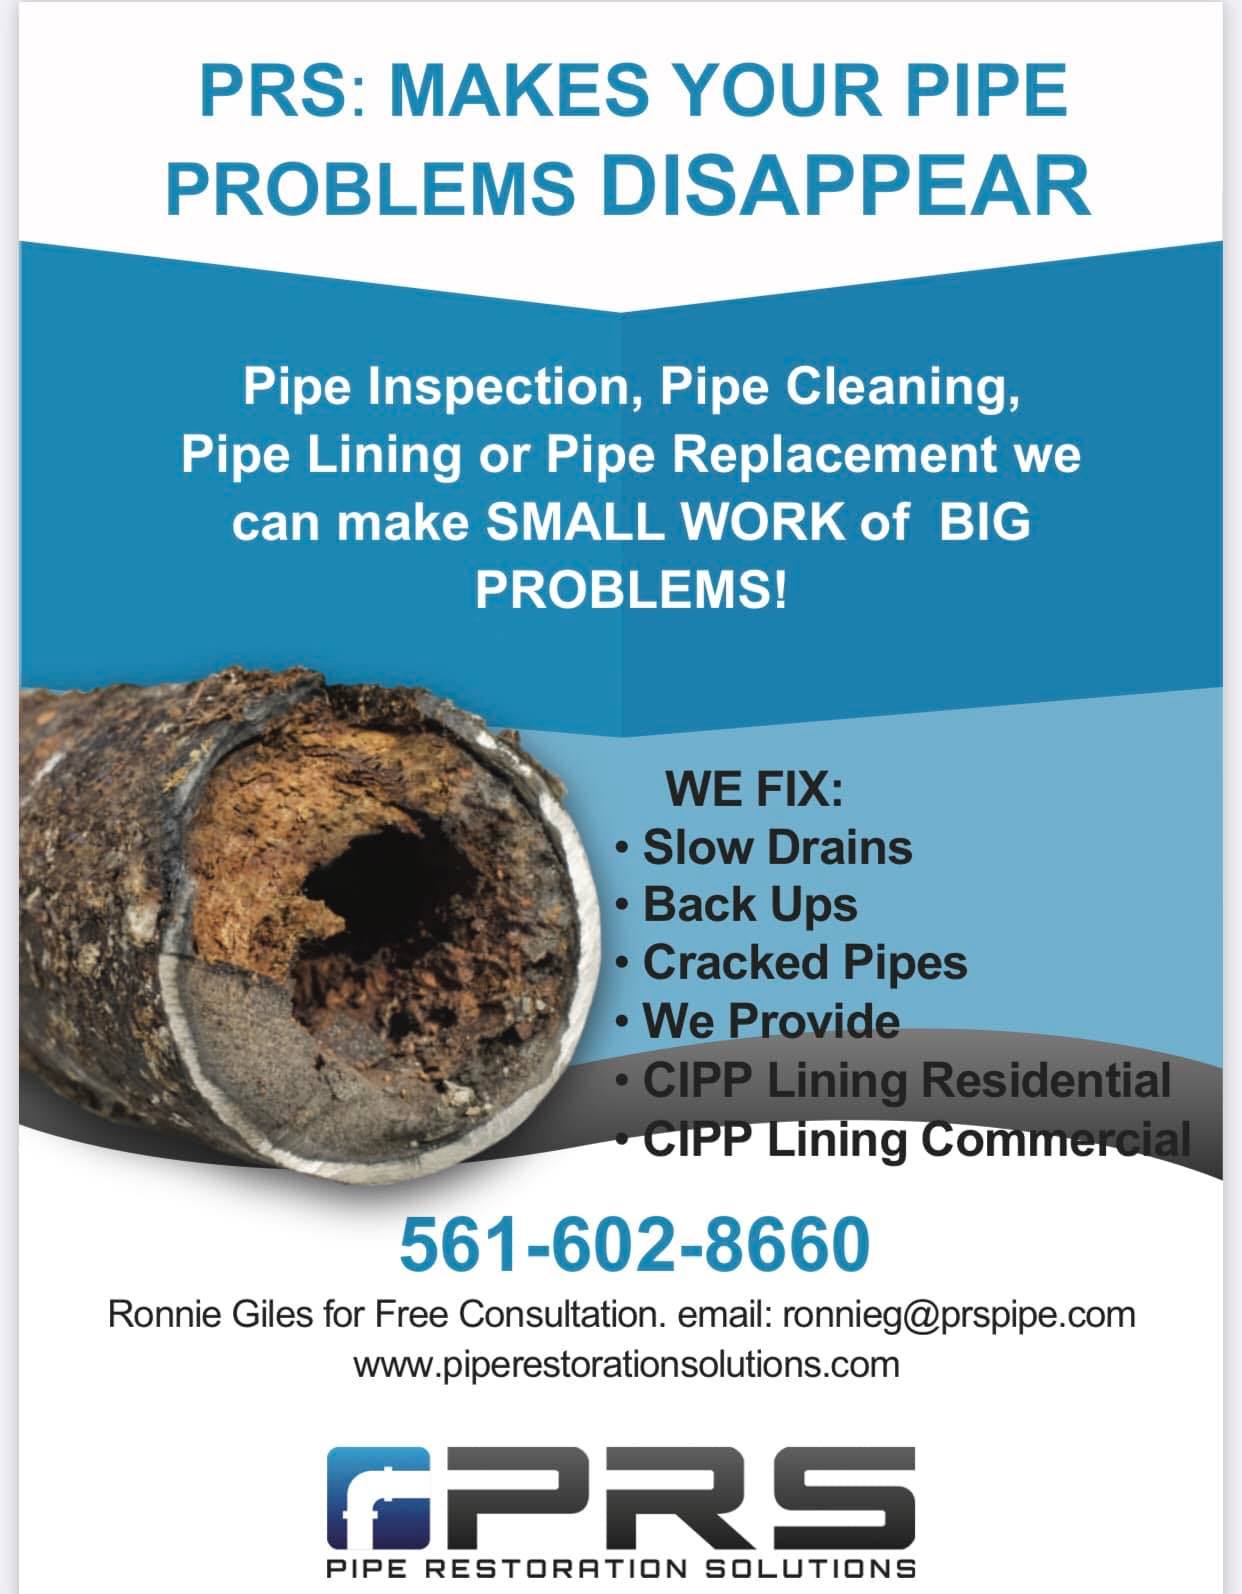 Problem with a Pipe in the Lower 48 call Me Ronnie-G “The Pipe Guy” Call or Text Ron Giles at 561-602-8660 or email ronnieg@prspipe.com